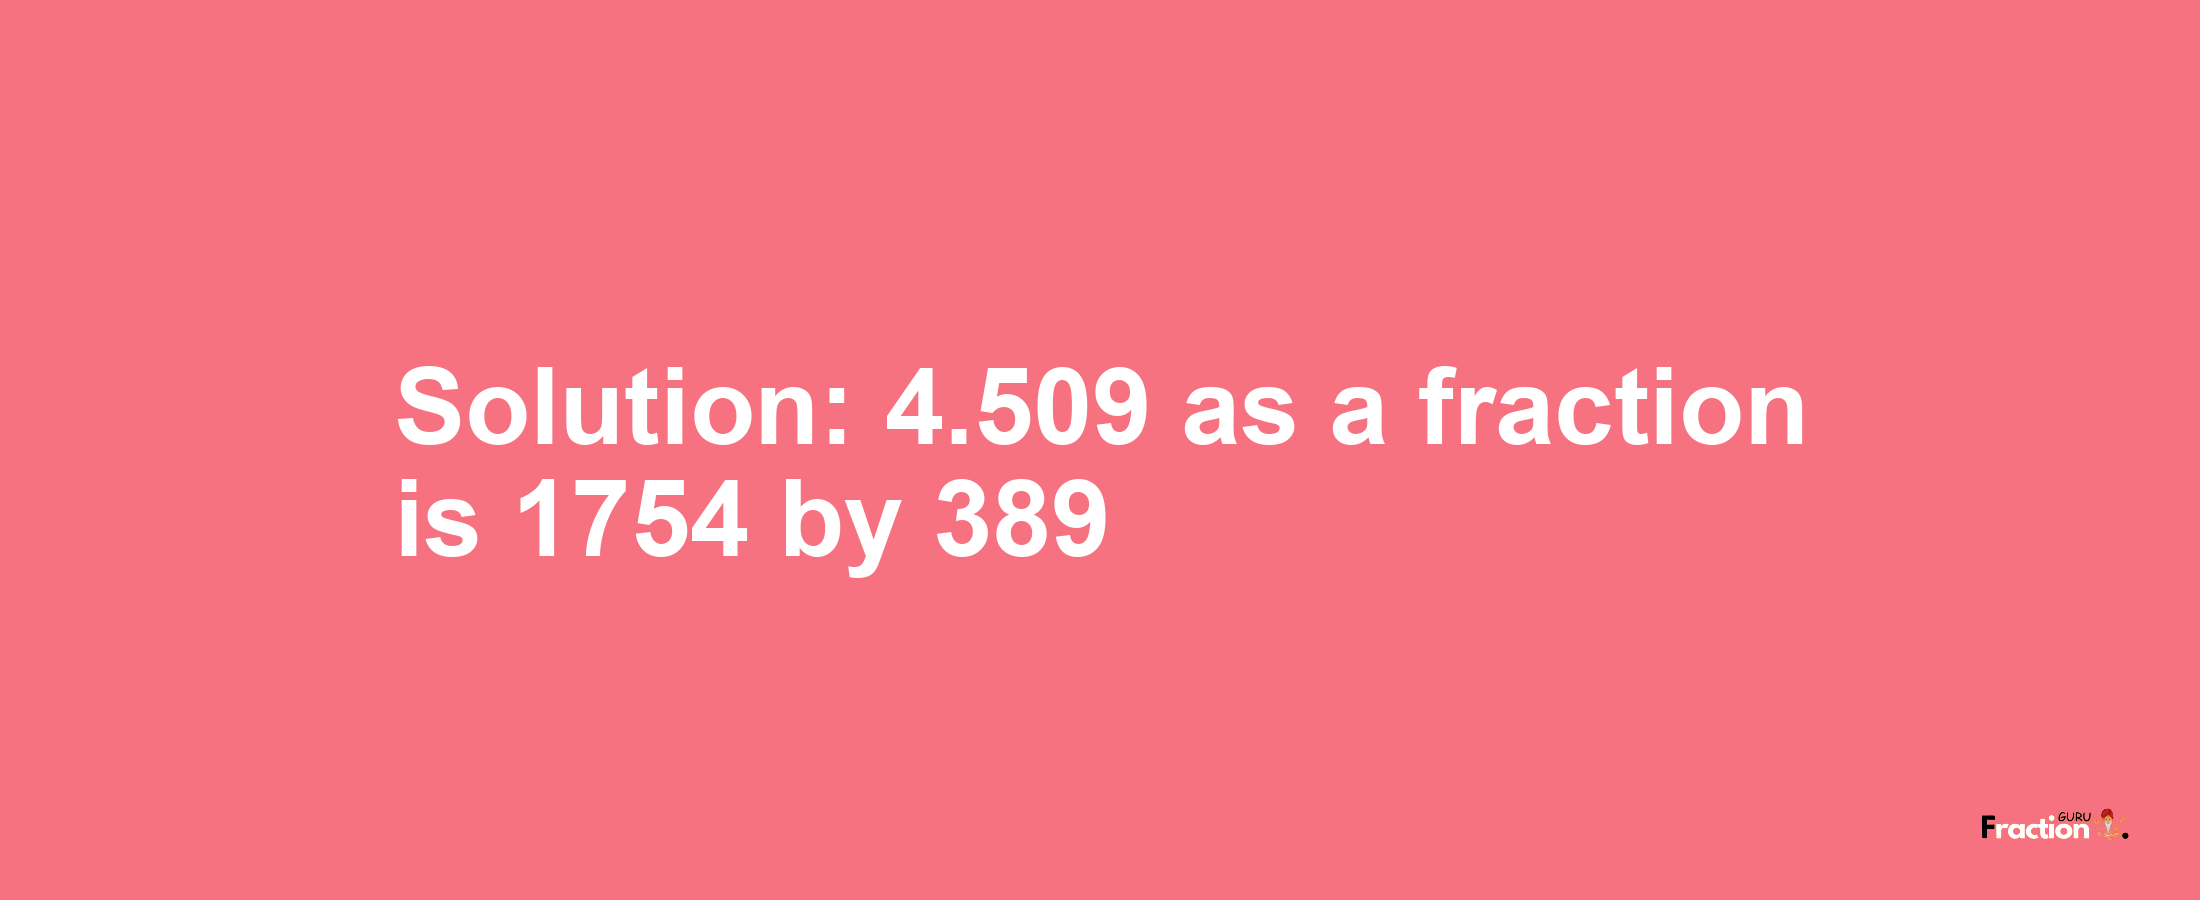 Solution:4.509 as a fraction is 1754/389